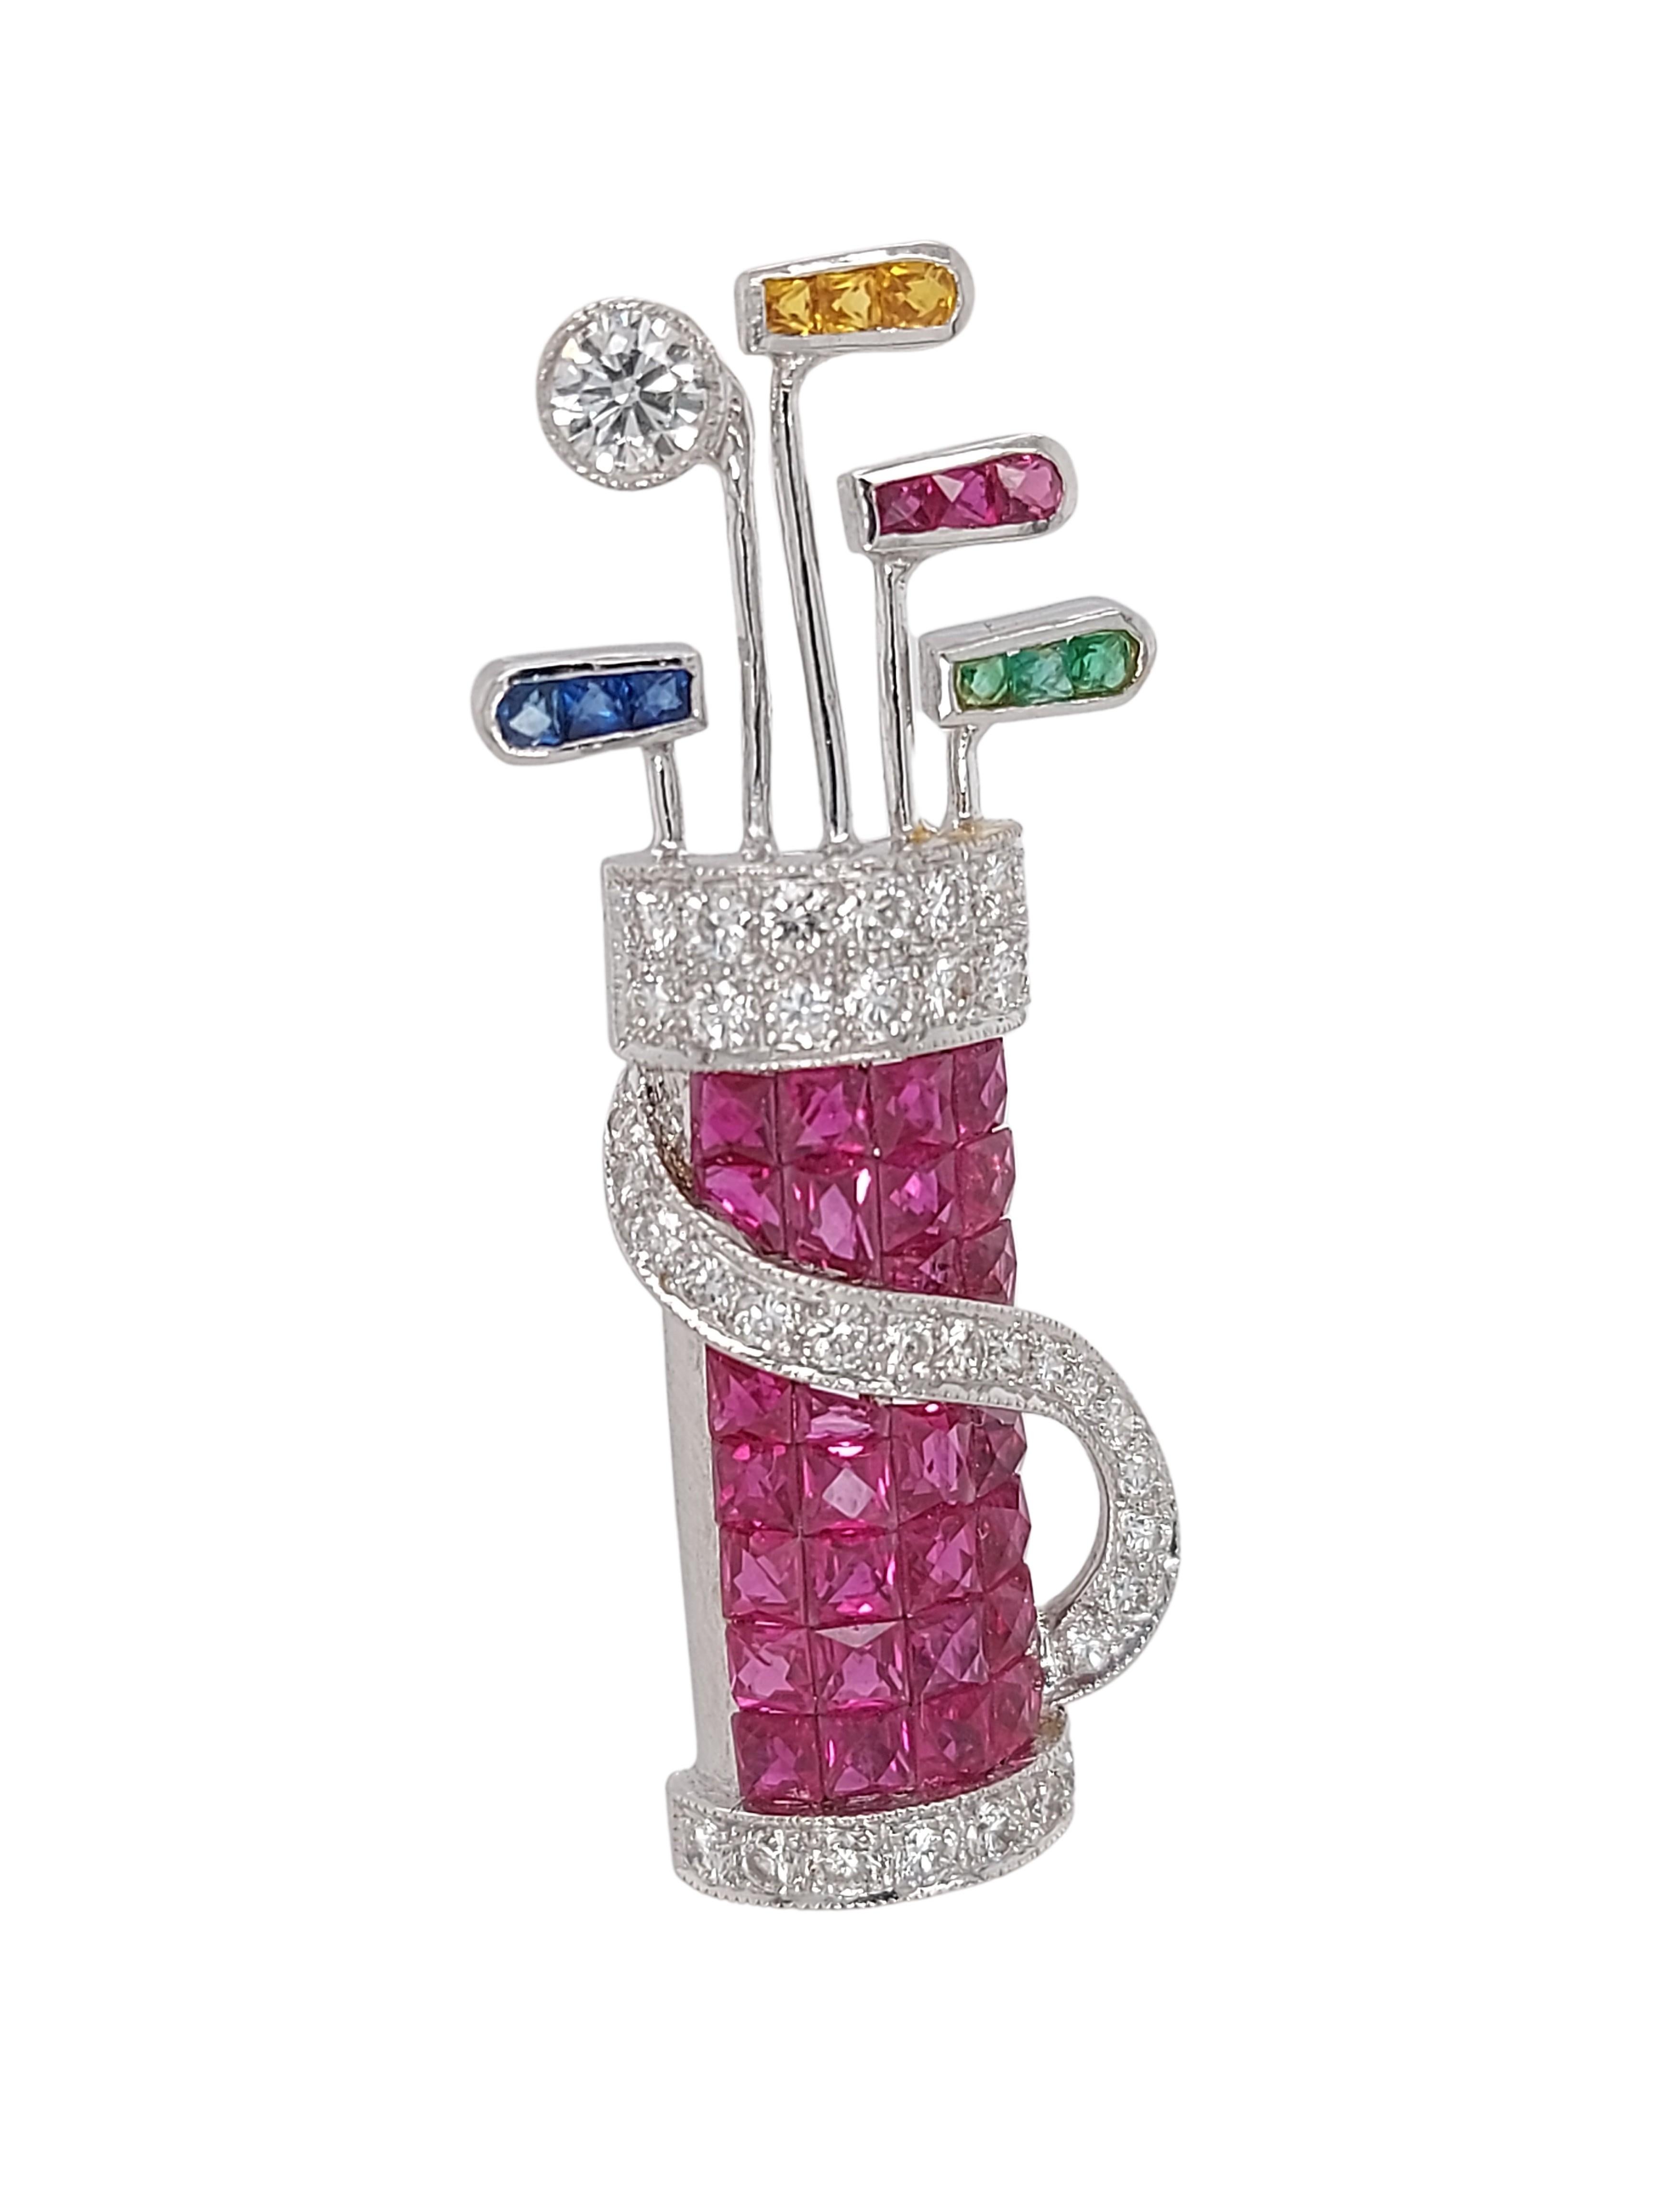 18kt White Gold Gem set Golf Club Bag Set With Diamond, Ruby, Emerald,Sapphire Hanger/Brooch

Amazing work of art pendant/brooch with beautiful invisible ruby setting.

31 ruby
3 citrine
3 emerald

Diamonds: Brilliant cut diamonds together approx.